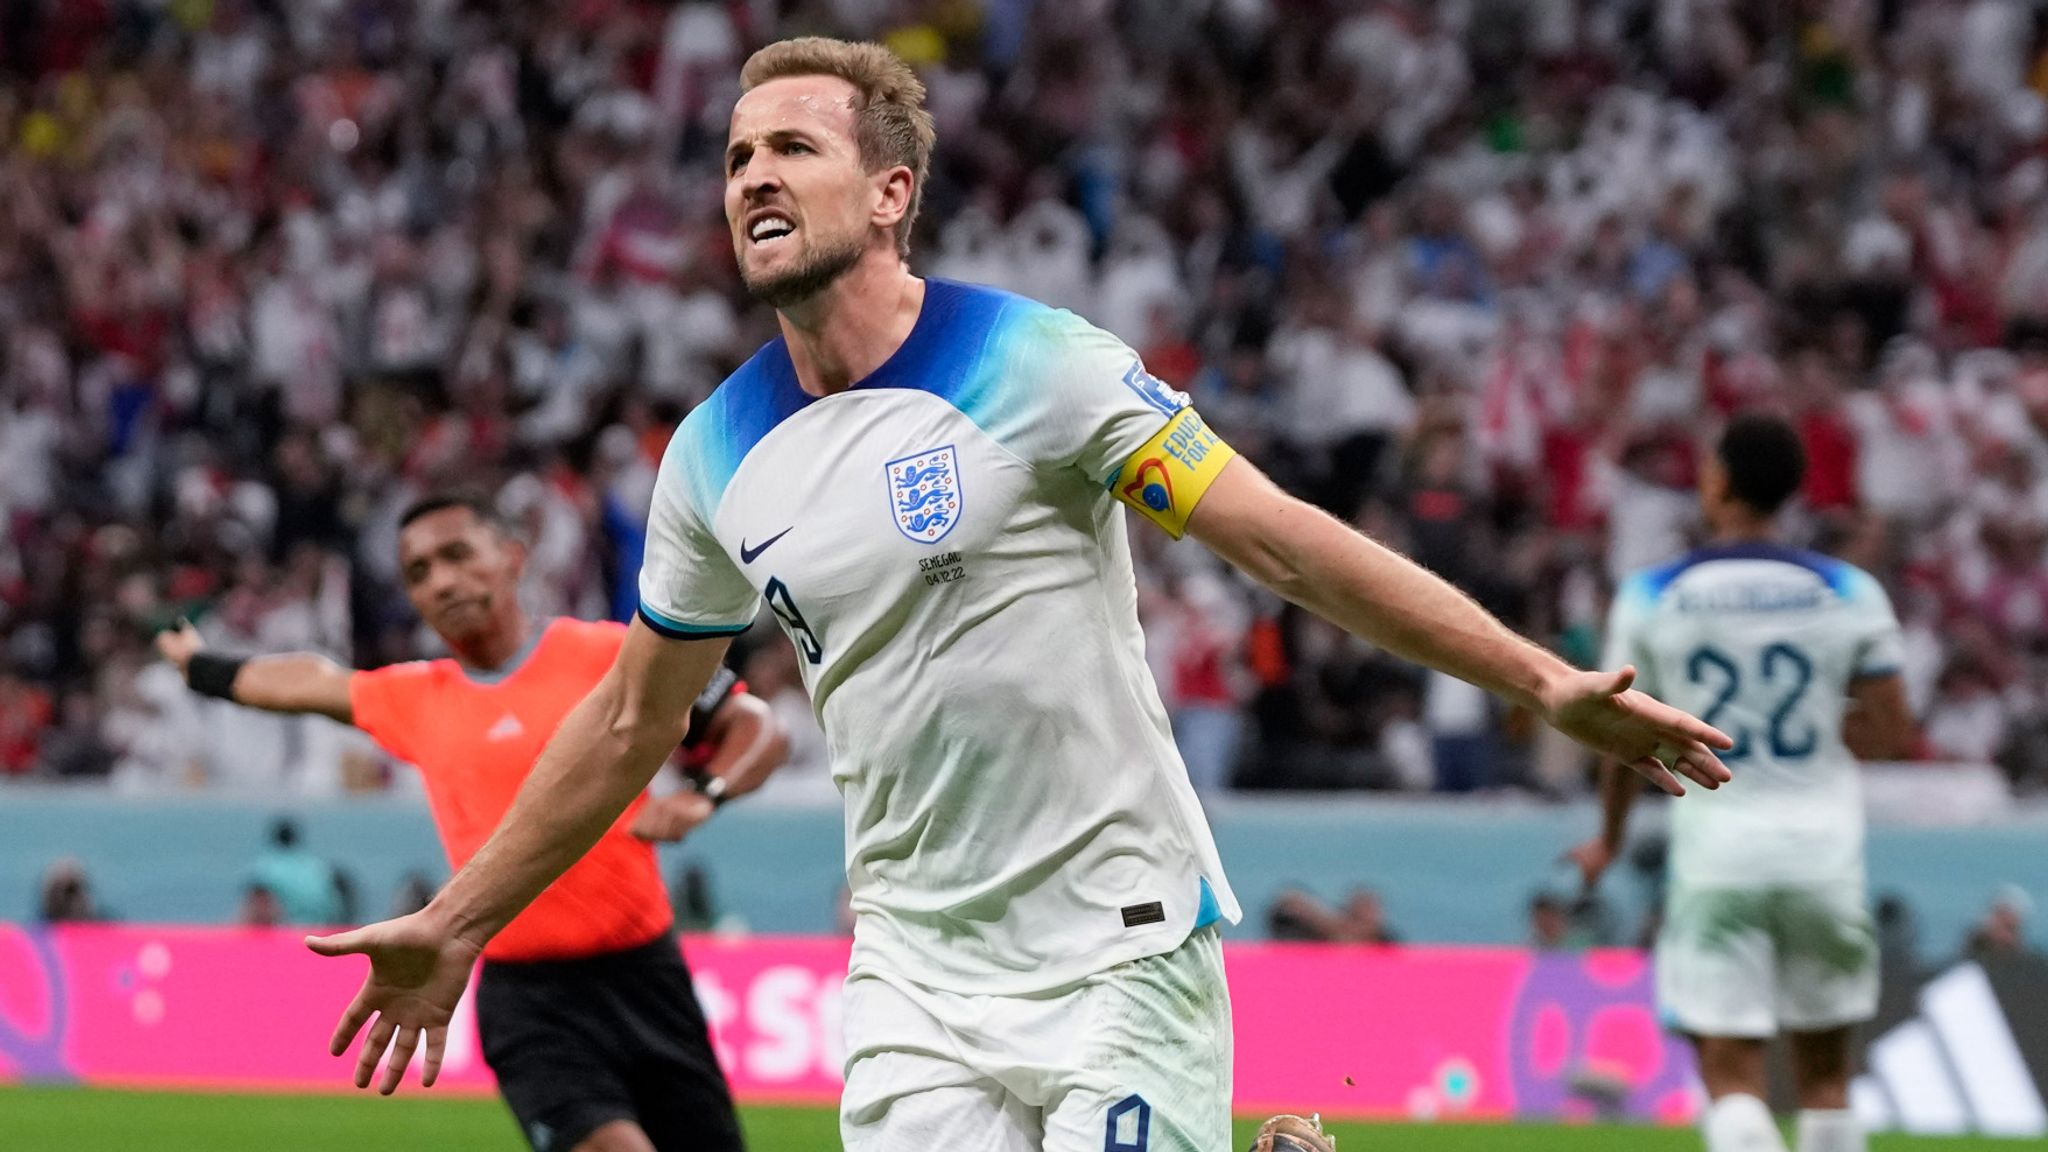 England 3-0 sweep past Senegal to set up World Cup quarter-final with France